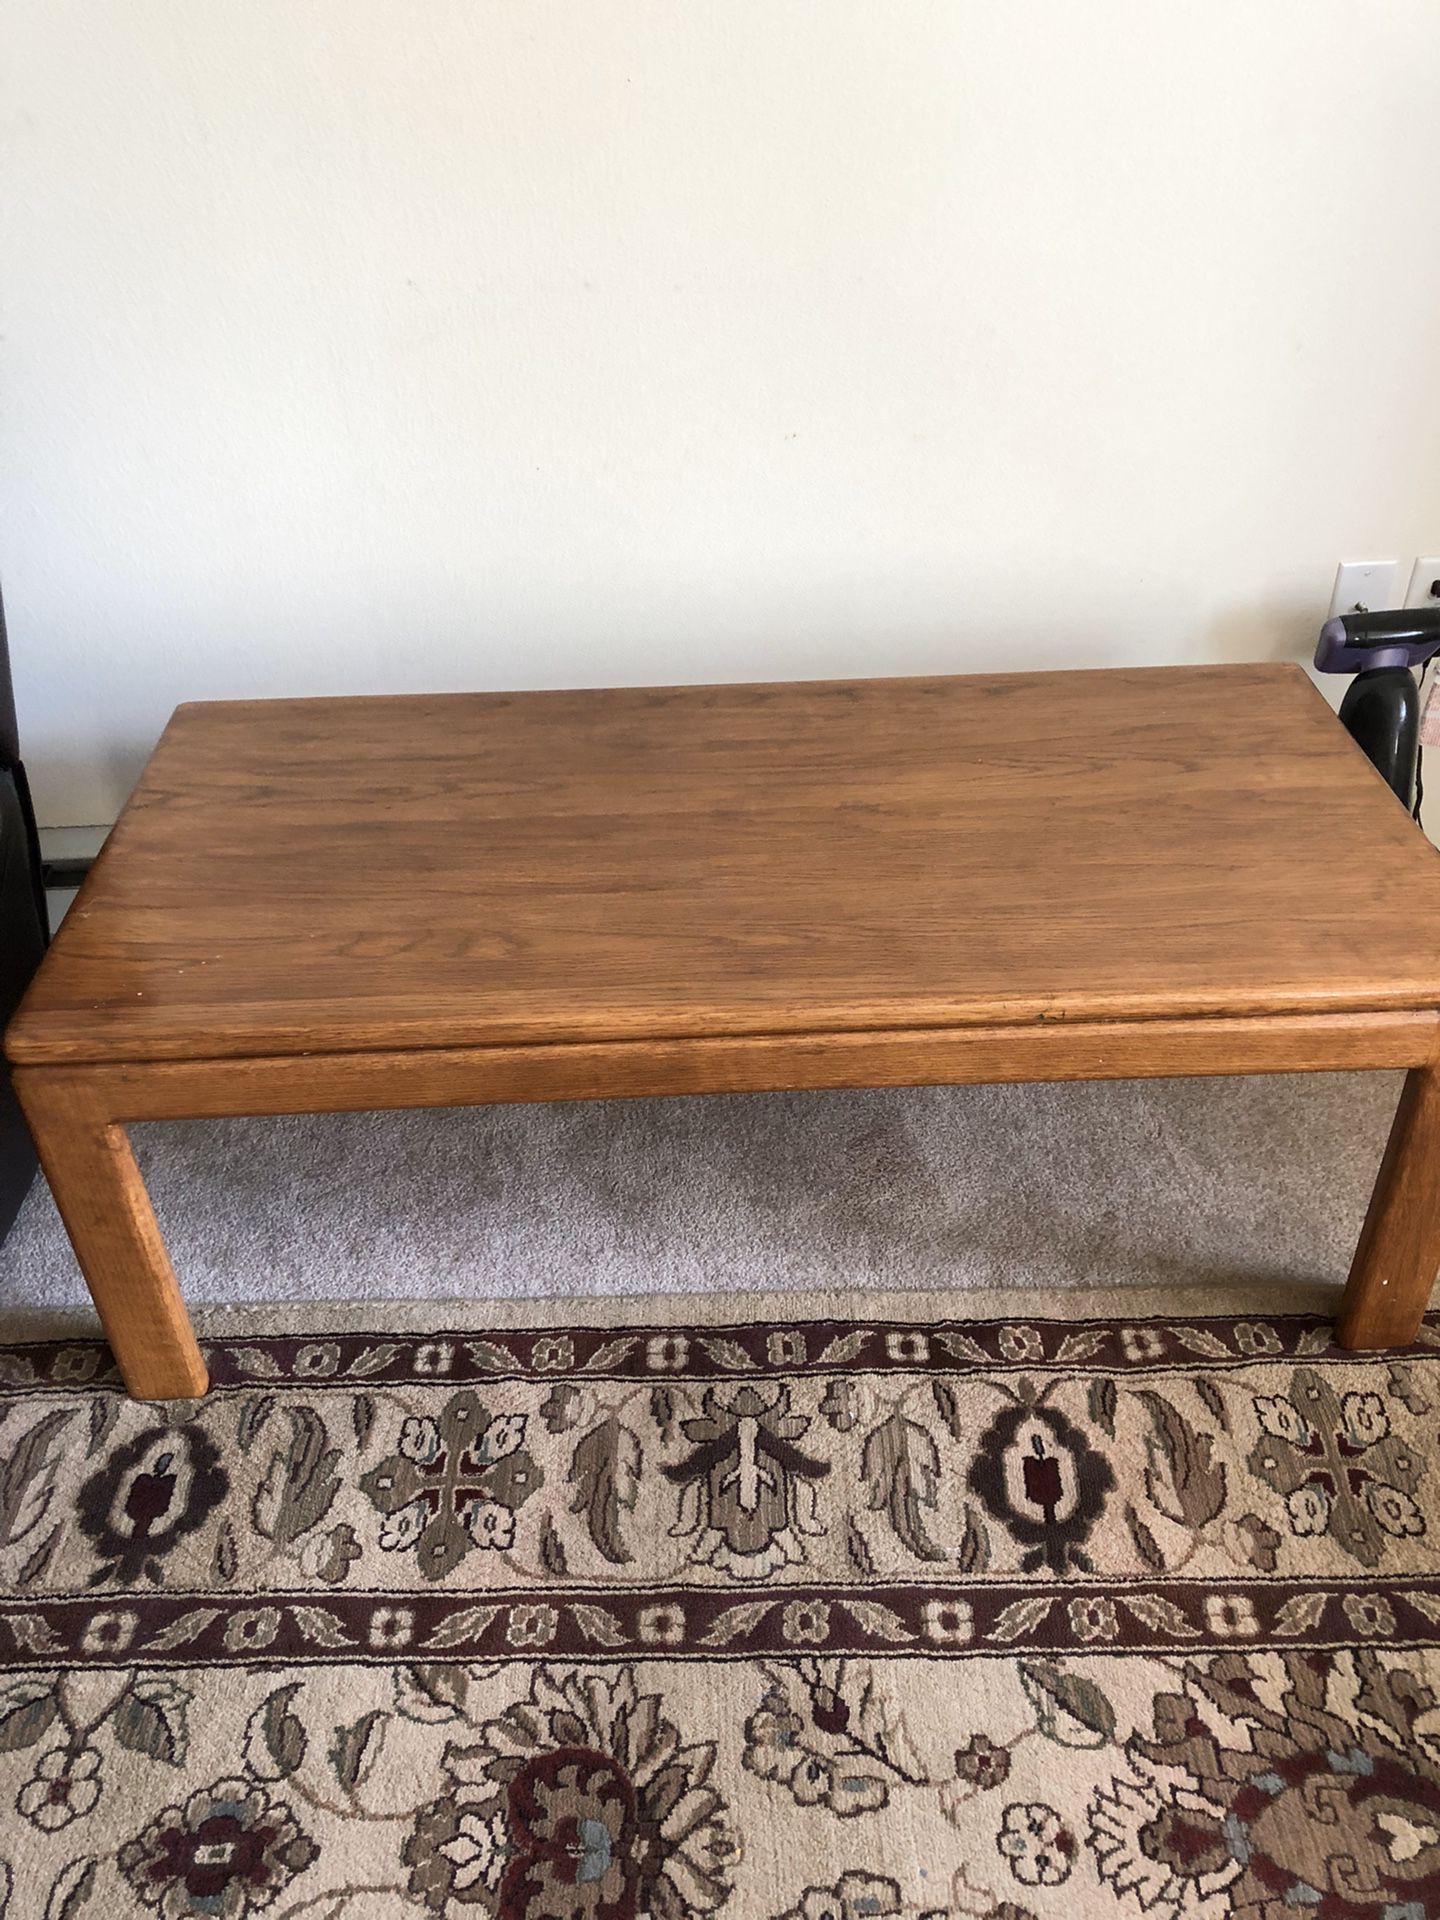 Oak coffee table 24x 49x17 good condition